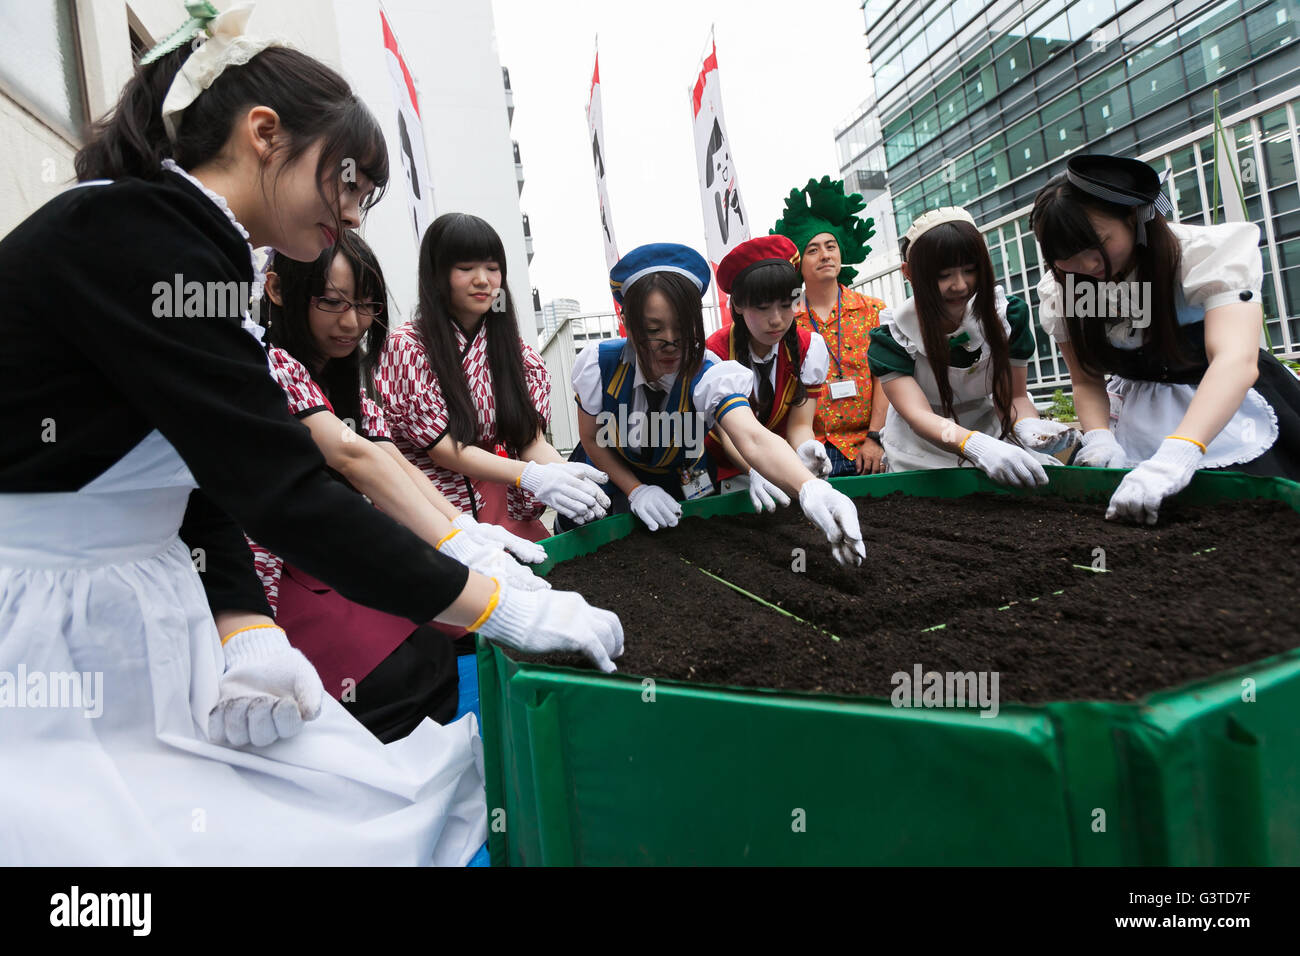 Akihabara maids sow seeds on a rooftop garden at the Japan Agricultural Newspaper building in Akihabara on June 15, 2016, Tokyo, Japan. The annual event organised by NPO group Licolita sees maids and volunteers from local cafes and stores joining the Akihabara Vegetable Garden Project. This year 7 Akihabara maids planted habanero, peppermint, bhut jolokia and coriander. © Rodrigo Reyes Marin/AFLO/Alamy Live News Stock Photo